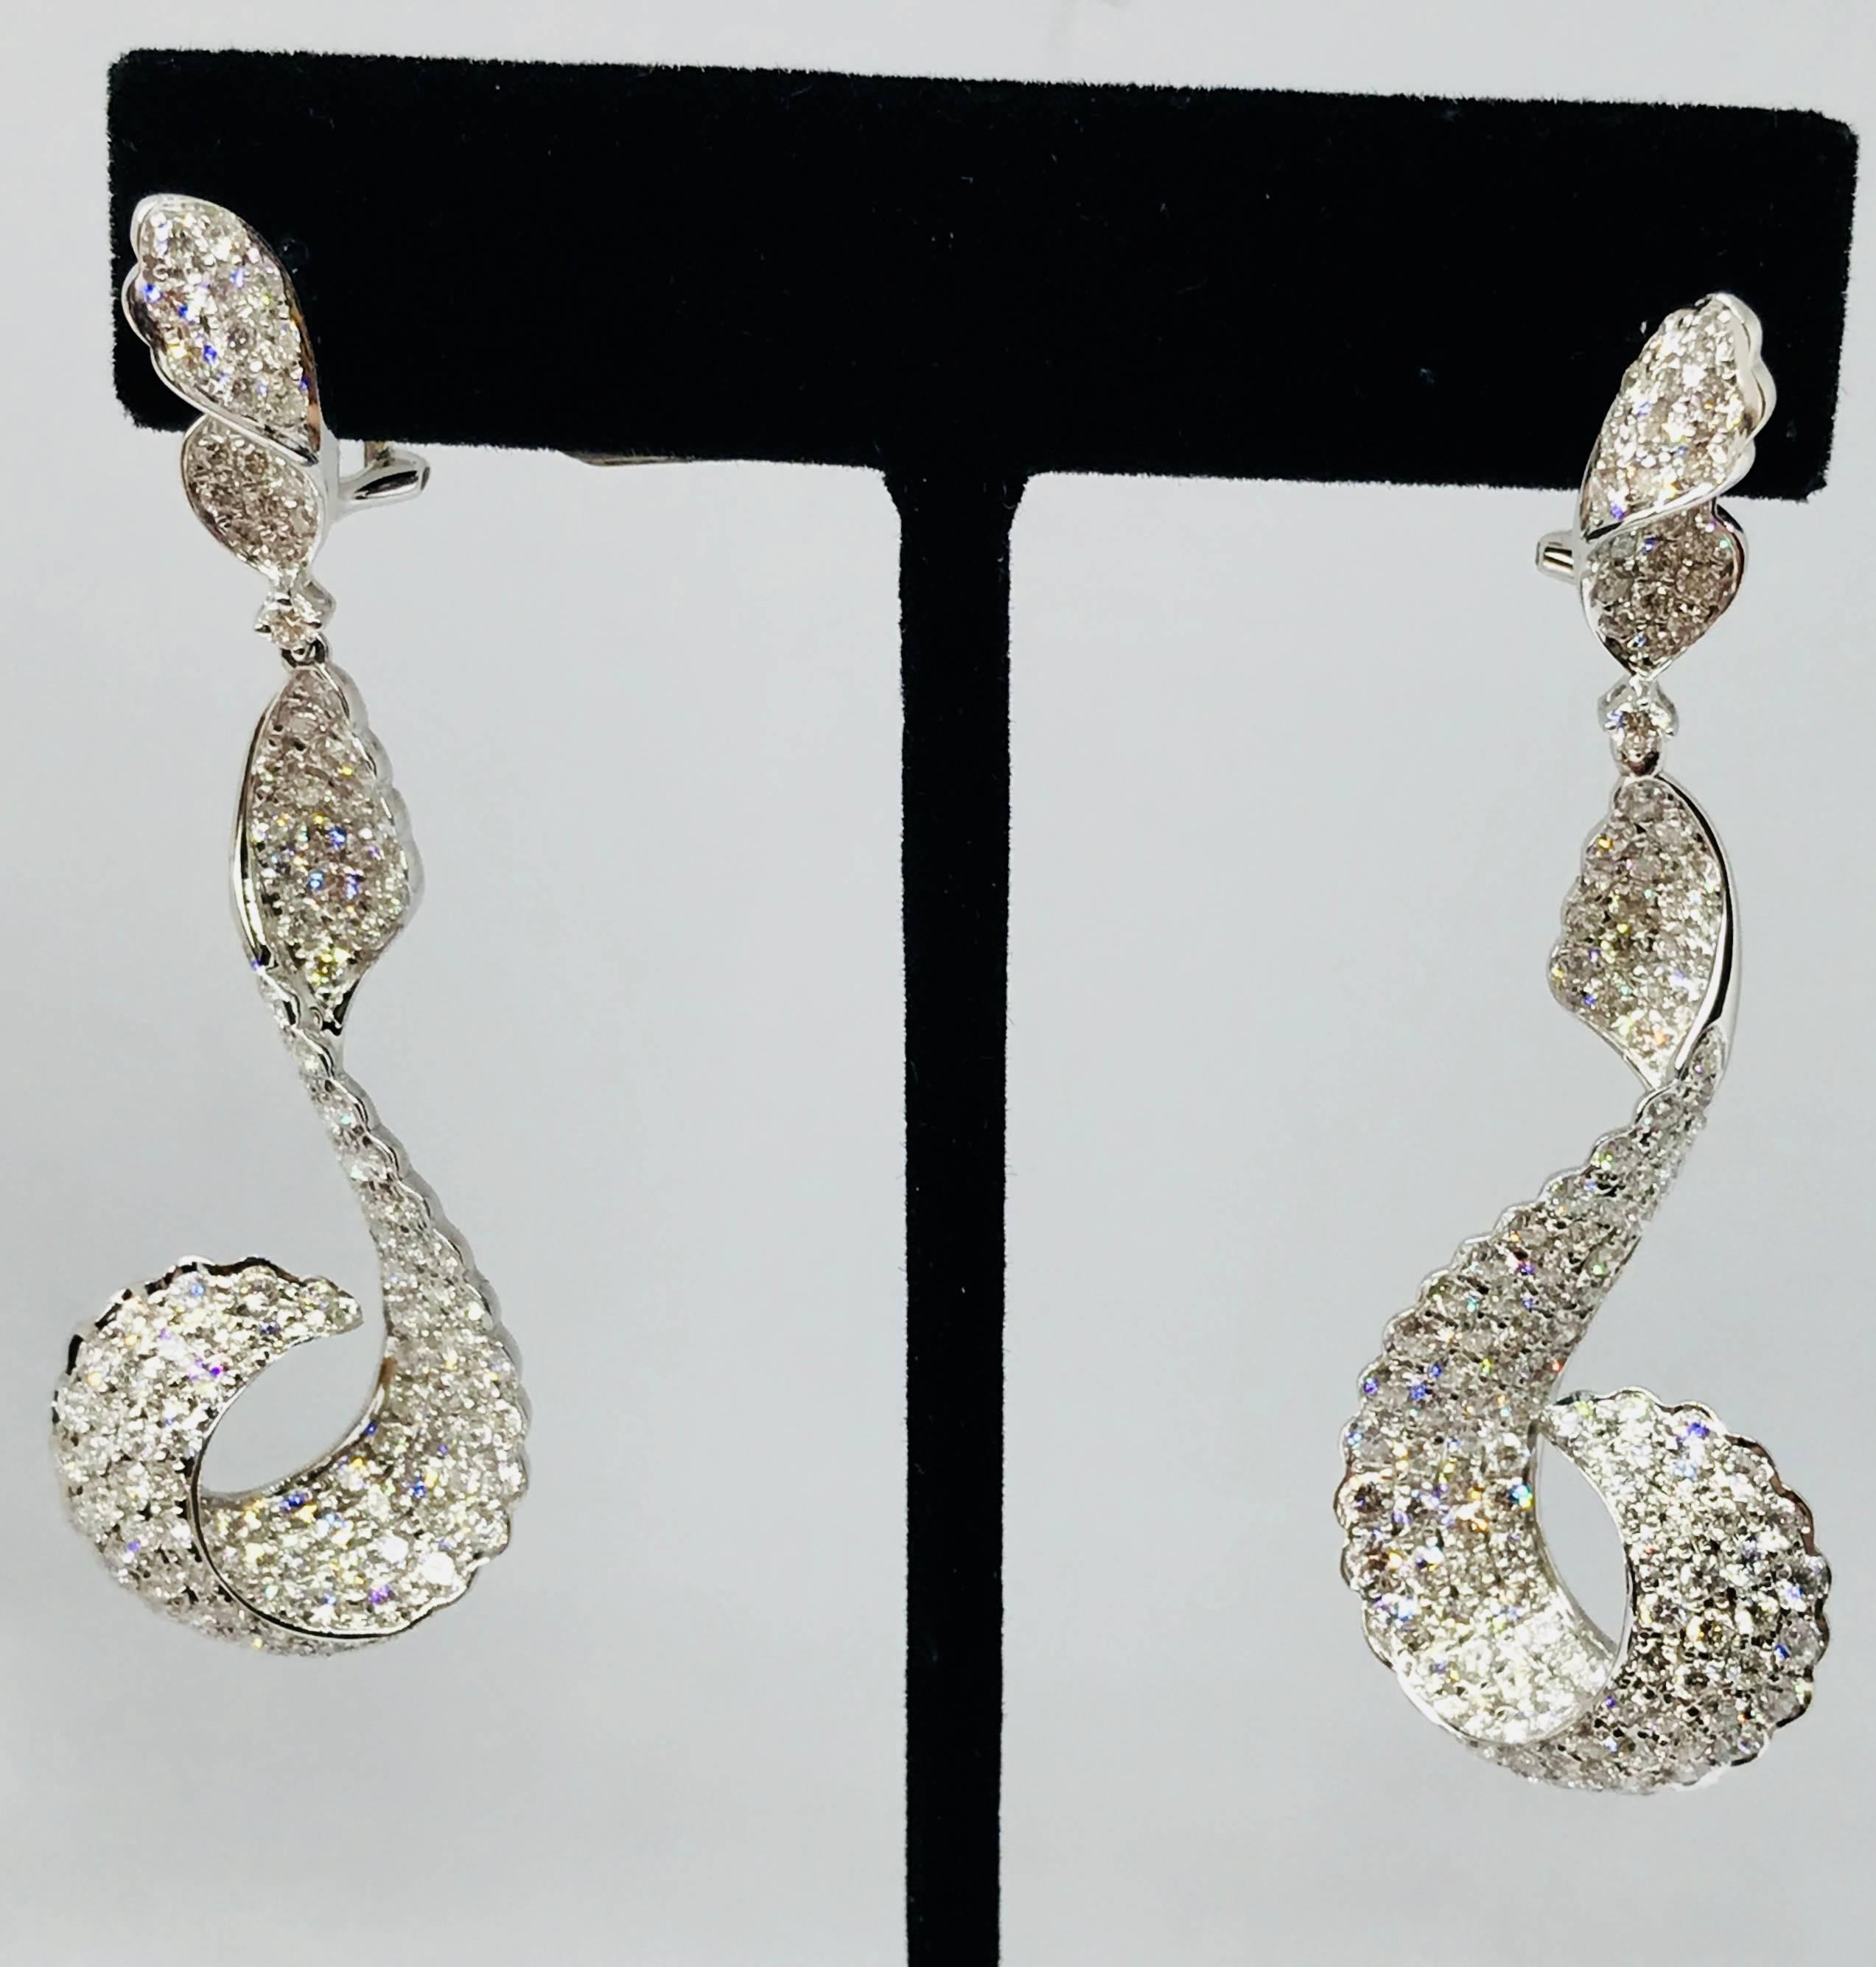 Most exclusive one of a kind Diamond earring .
Hand Crafted and Designed by Top designer . 
stunning over evening gown and high end party 
18 kt White Gold 13.96 grams
VVS F Diamonds 286 Stones 6.80 Carats 